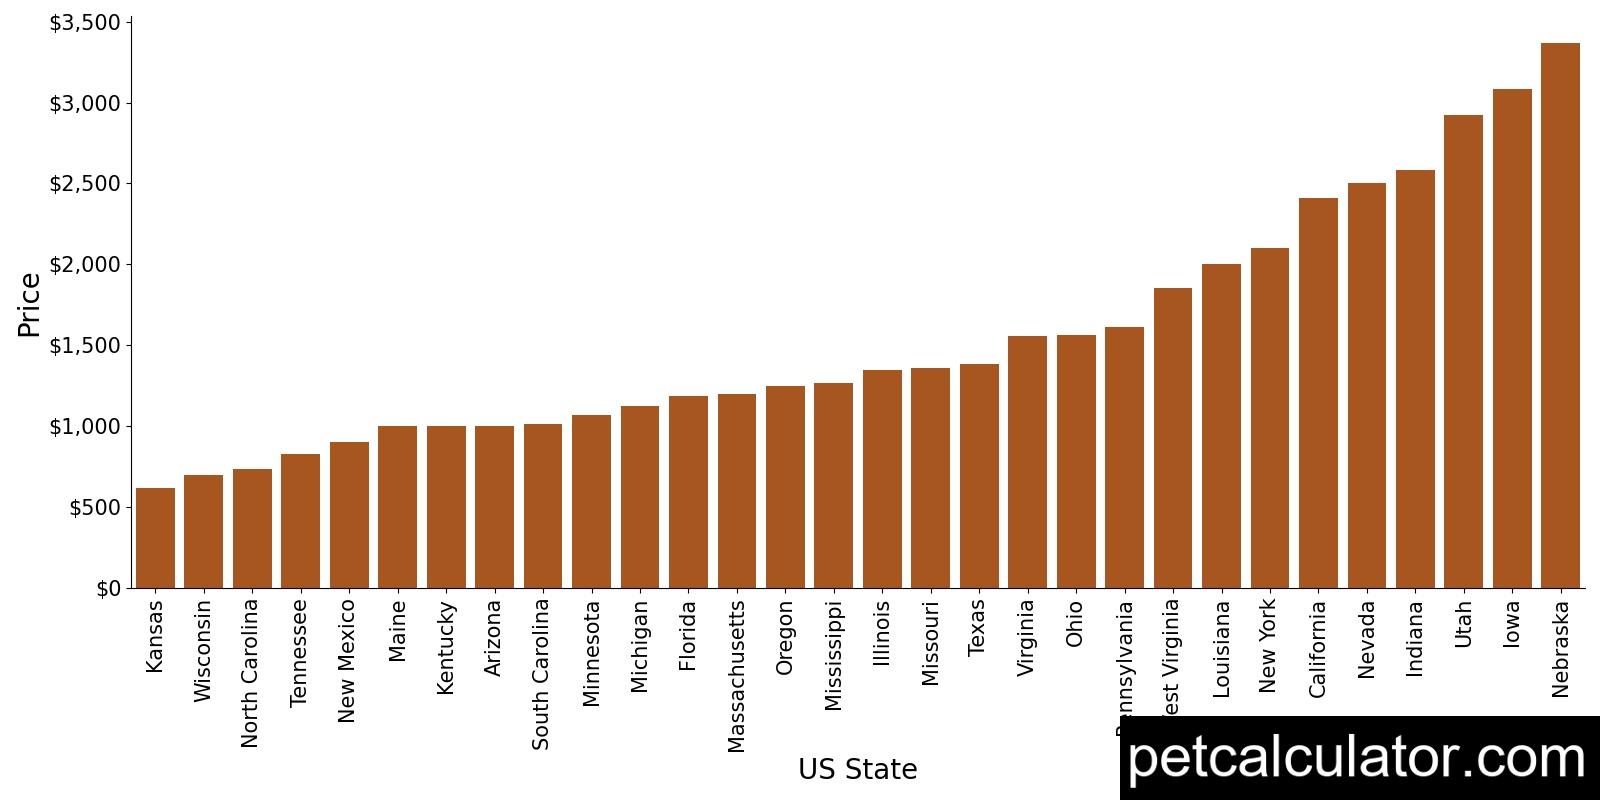 Price of Chow Chow by US State 